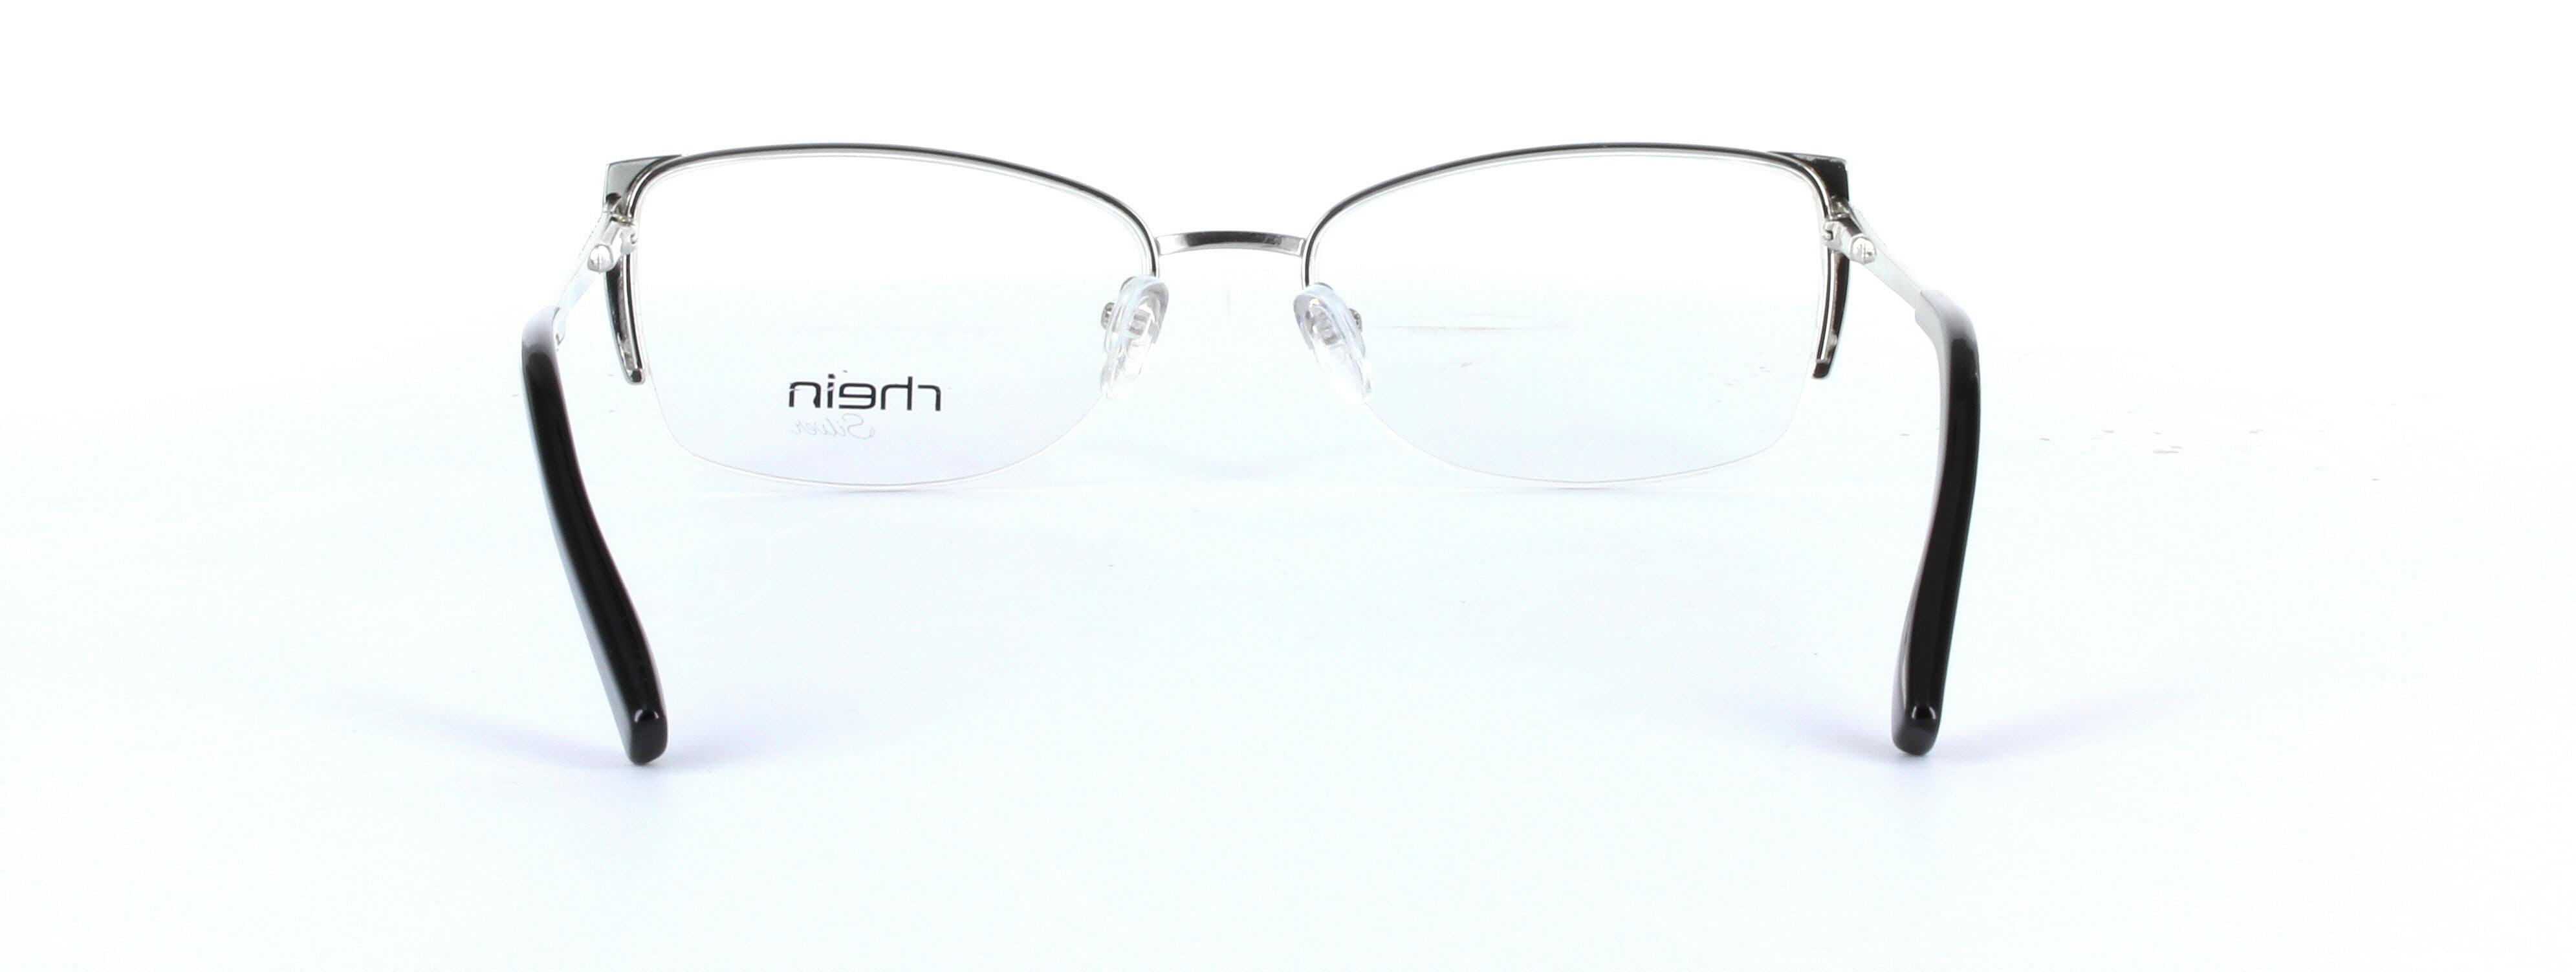 Donna Silver Semi Rimless Oval Rectangular Metal Glasses - Image View 3